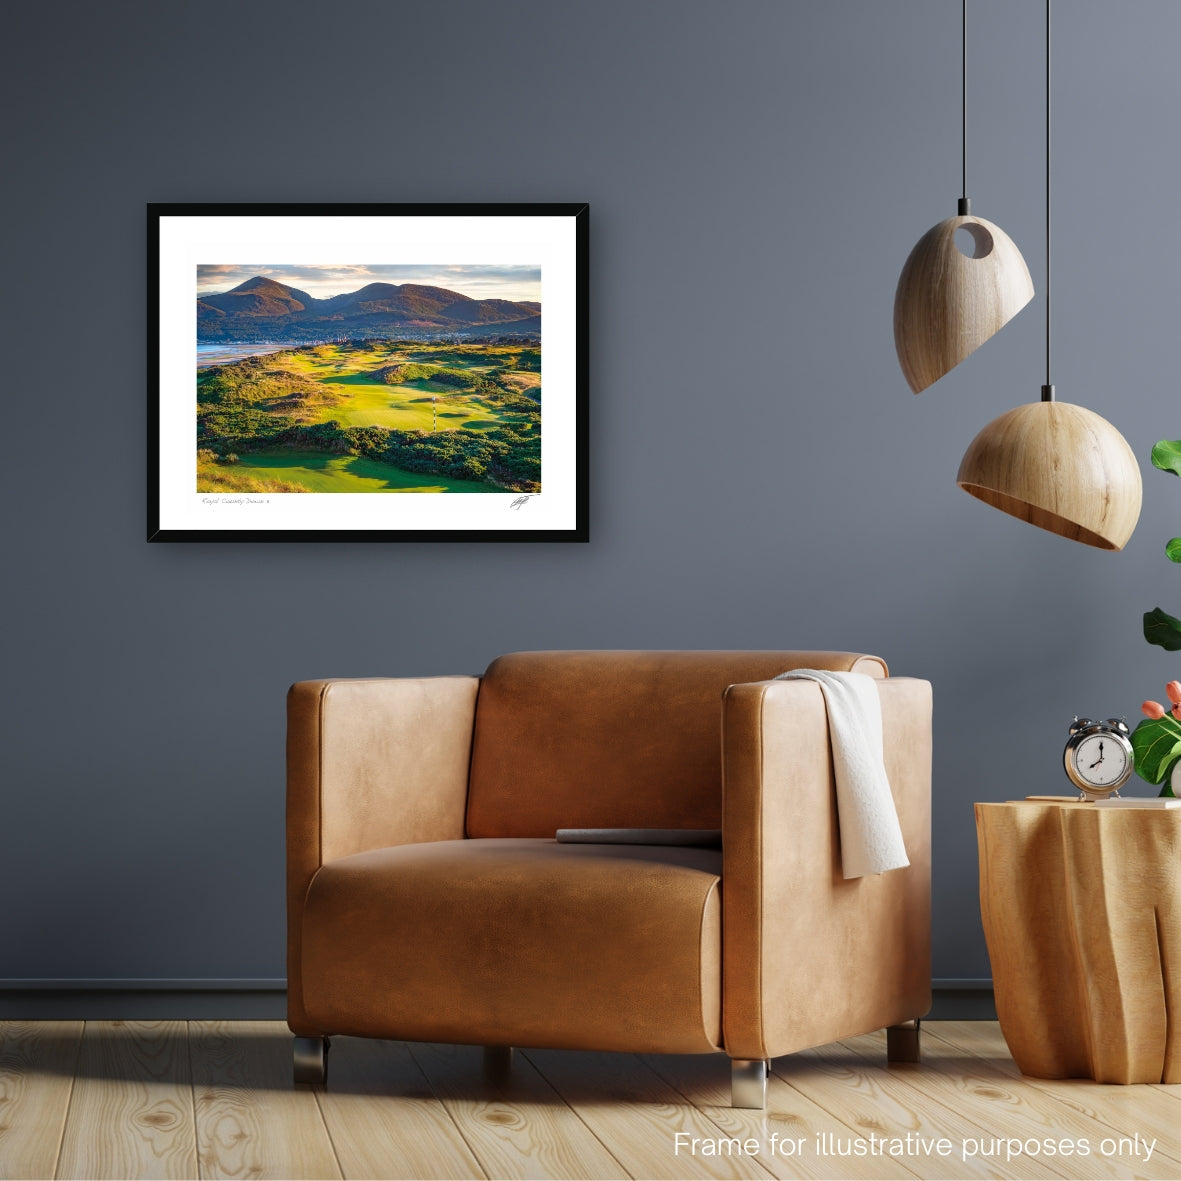 ROYAL COUNTY DOWN HOLE 3 FRAMED PHOTOGRAPHY PRINT BY ADAM TOTH